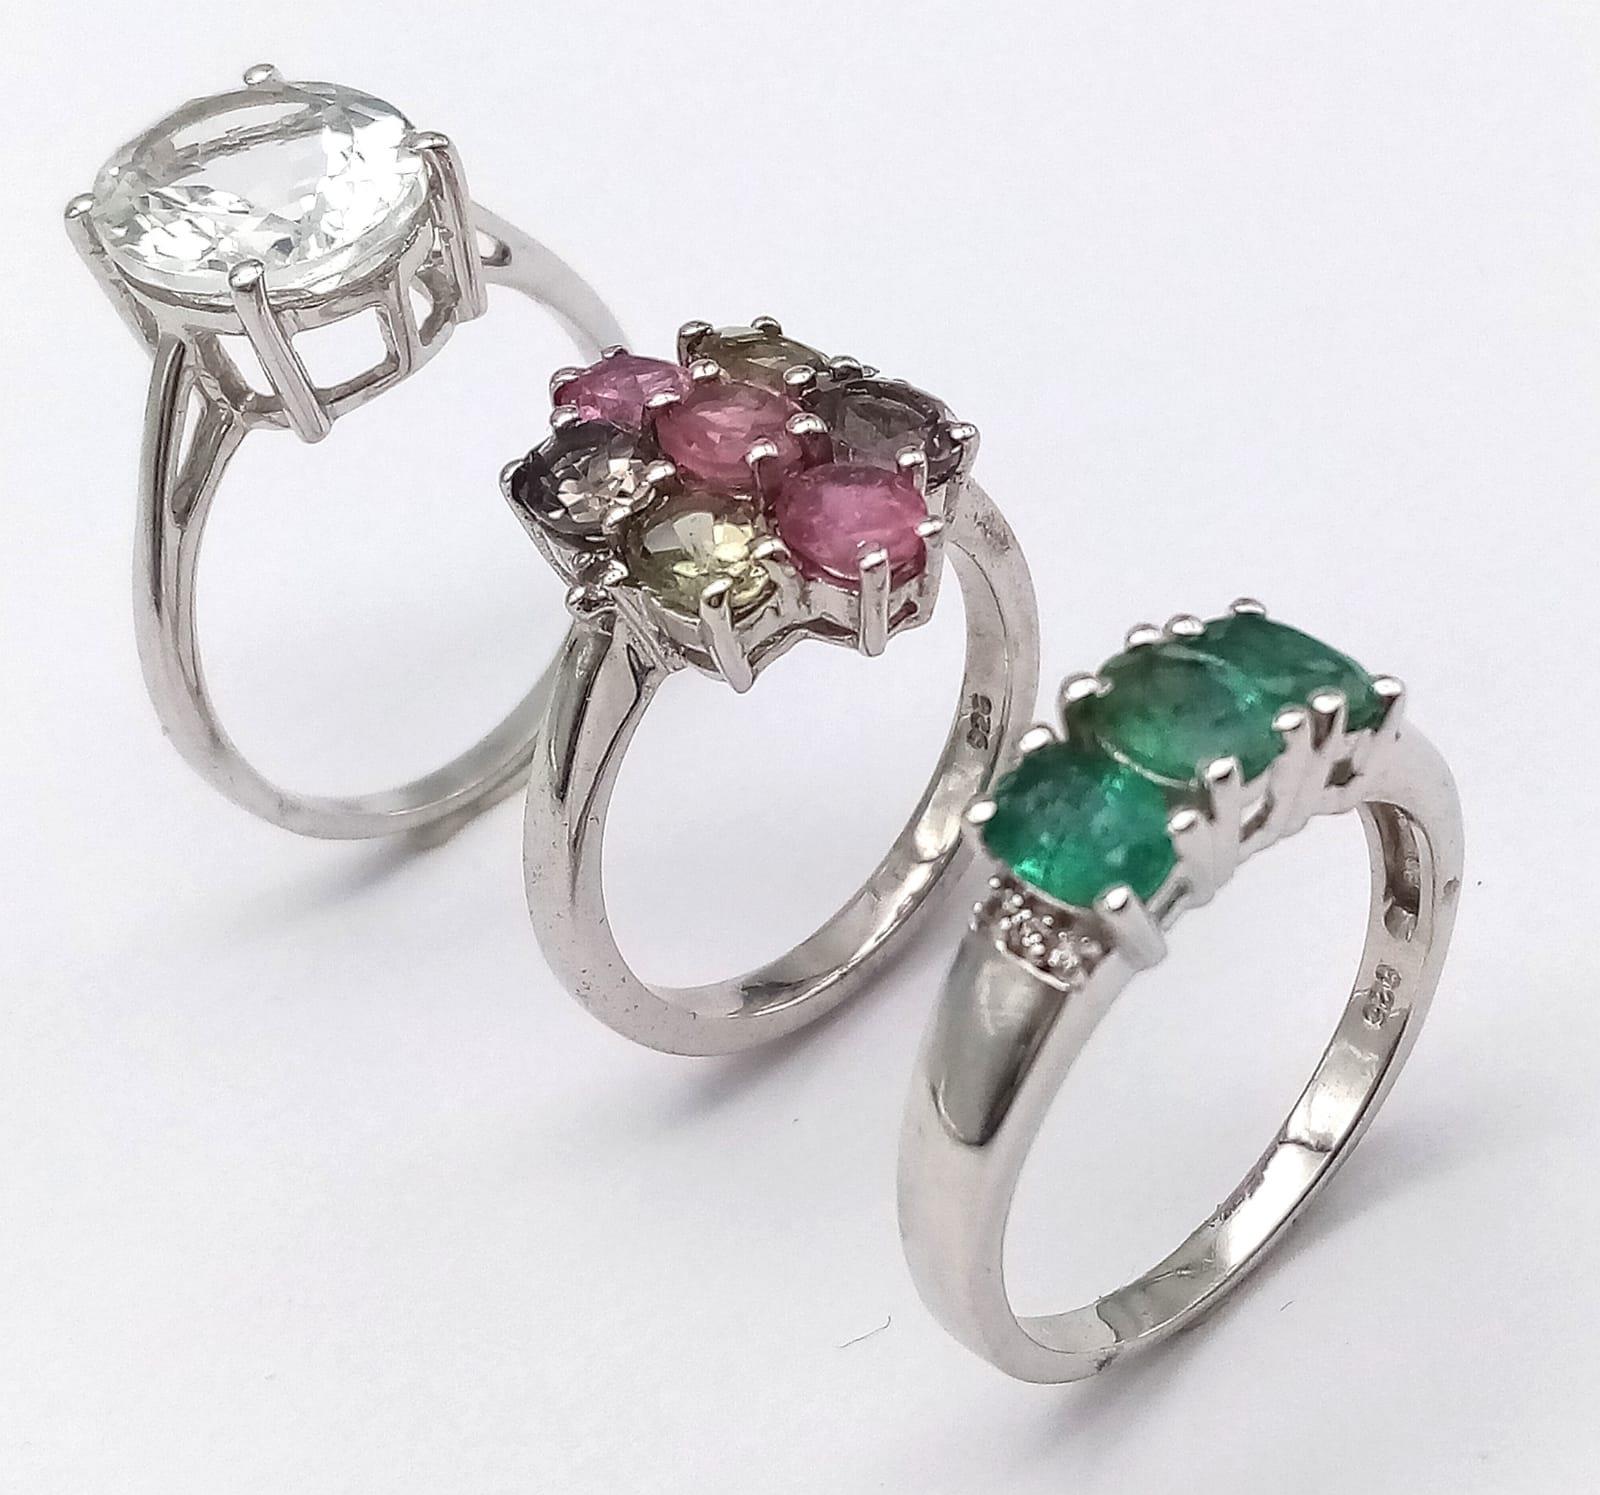 Three 925 Sterling Silver Gemstone Rings: Tourmaline - Size N, Topaz - Size S and Emerald - Size P. - Image 3 of 5